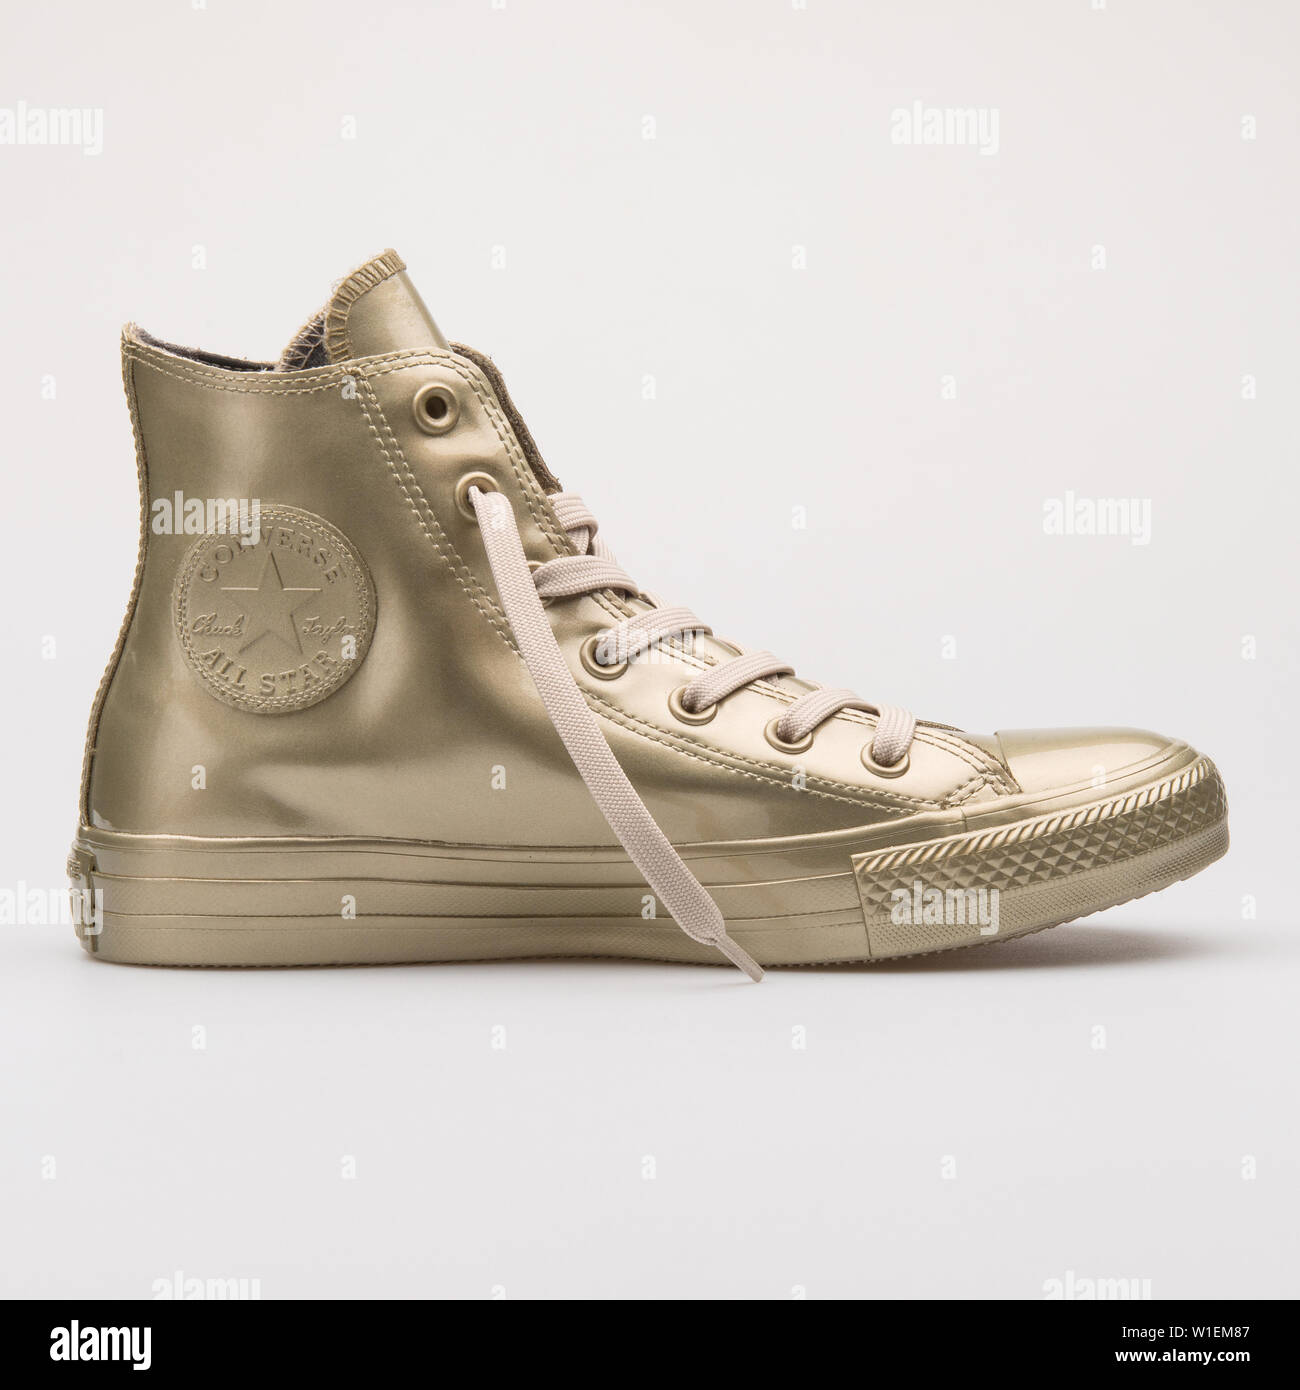 VIENNA, AUSTRIA - AUGUST 28, 2017: Converse Chuck Taylor All Star Metallic  Rubber High gold sneaker on white background Stock Photo - Alamy